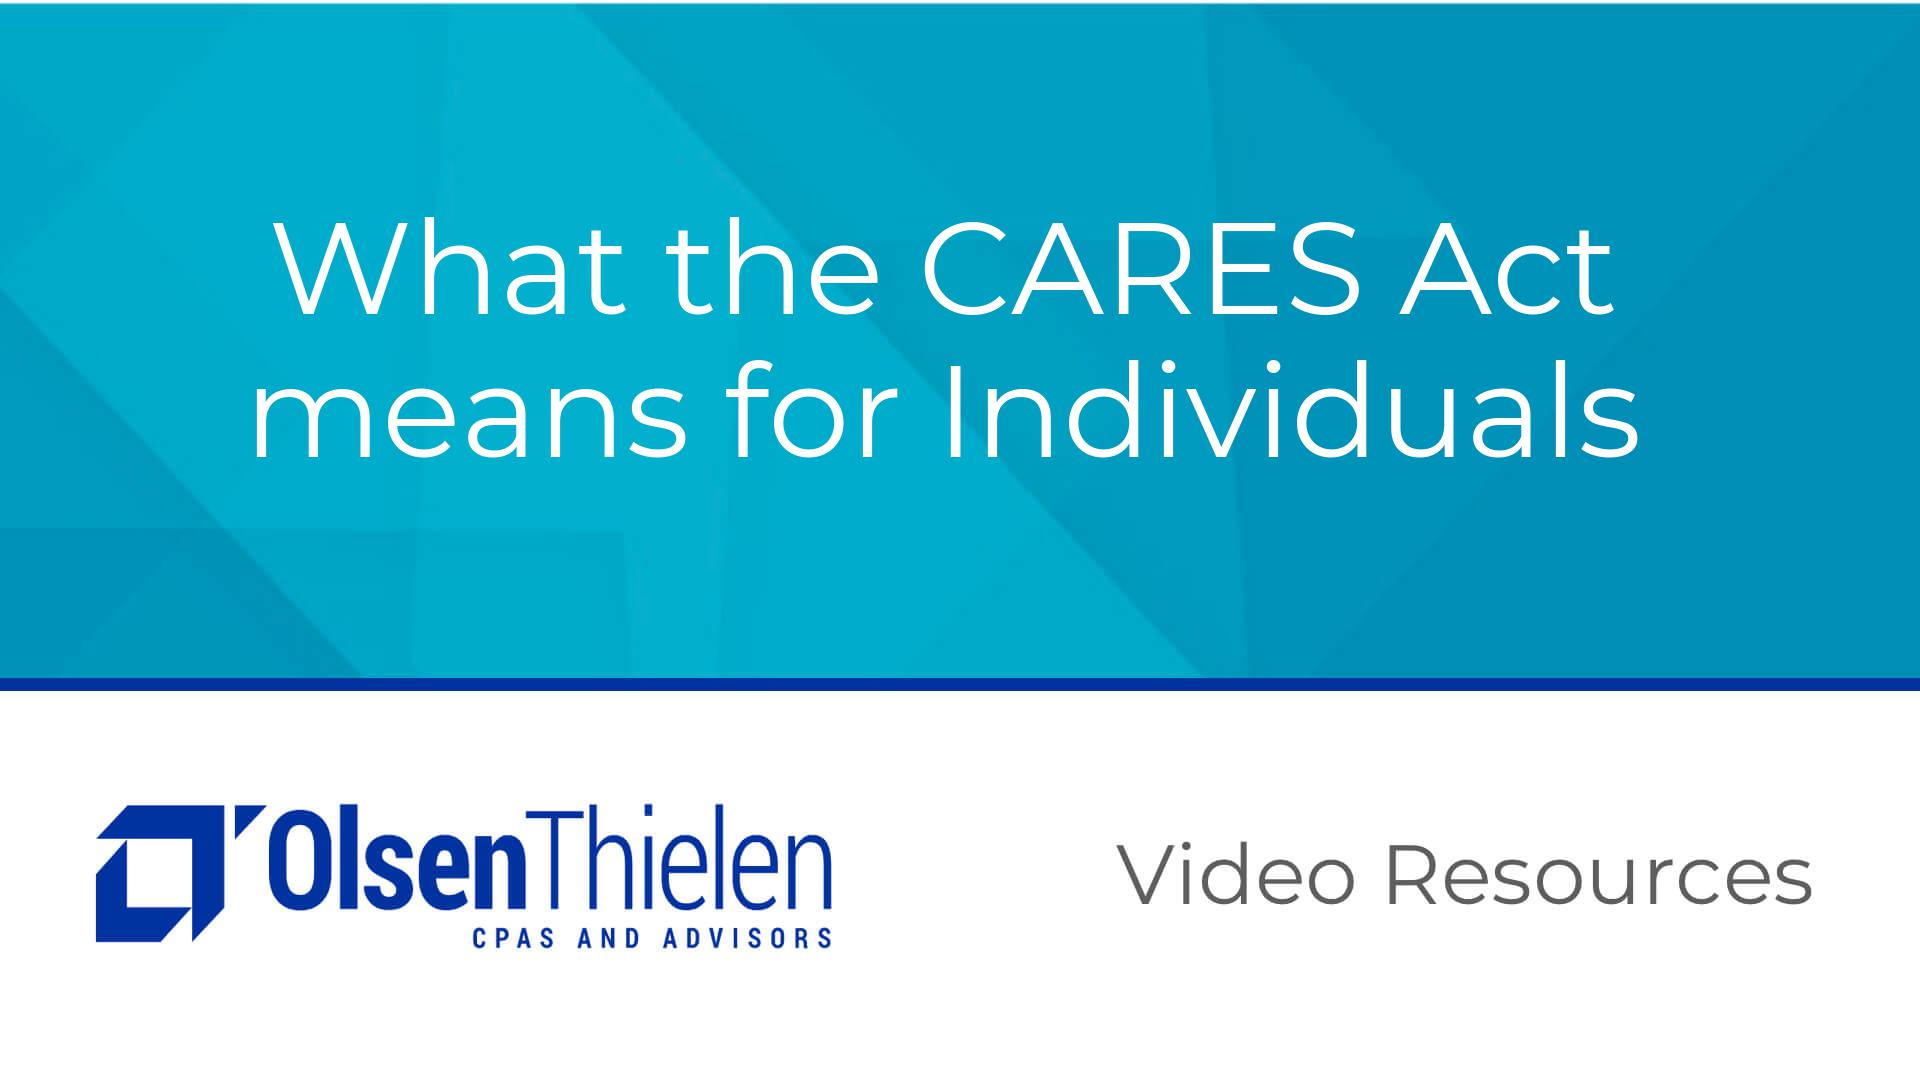 What the CARES Act means for Individuals